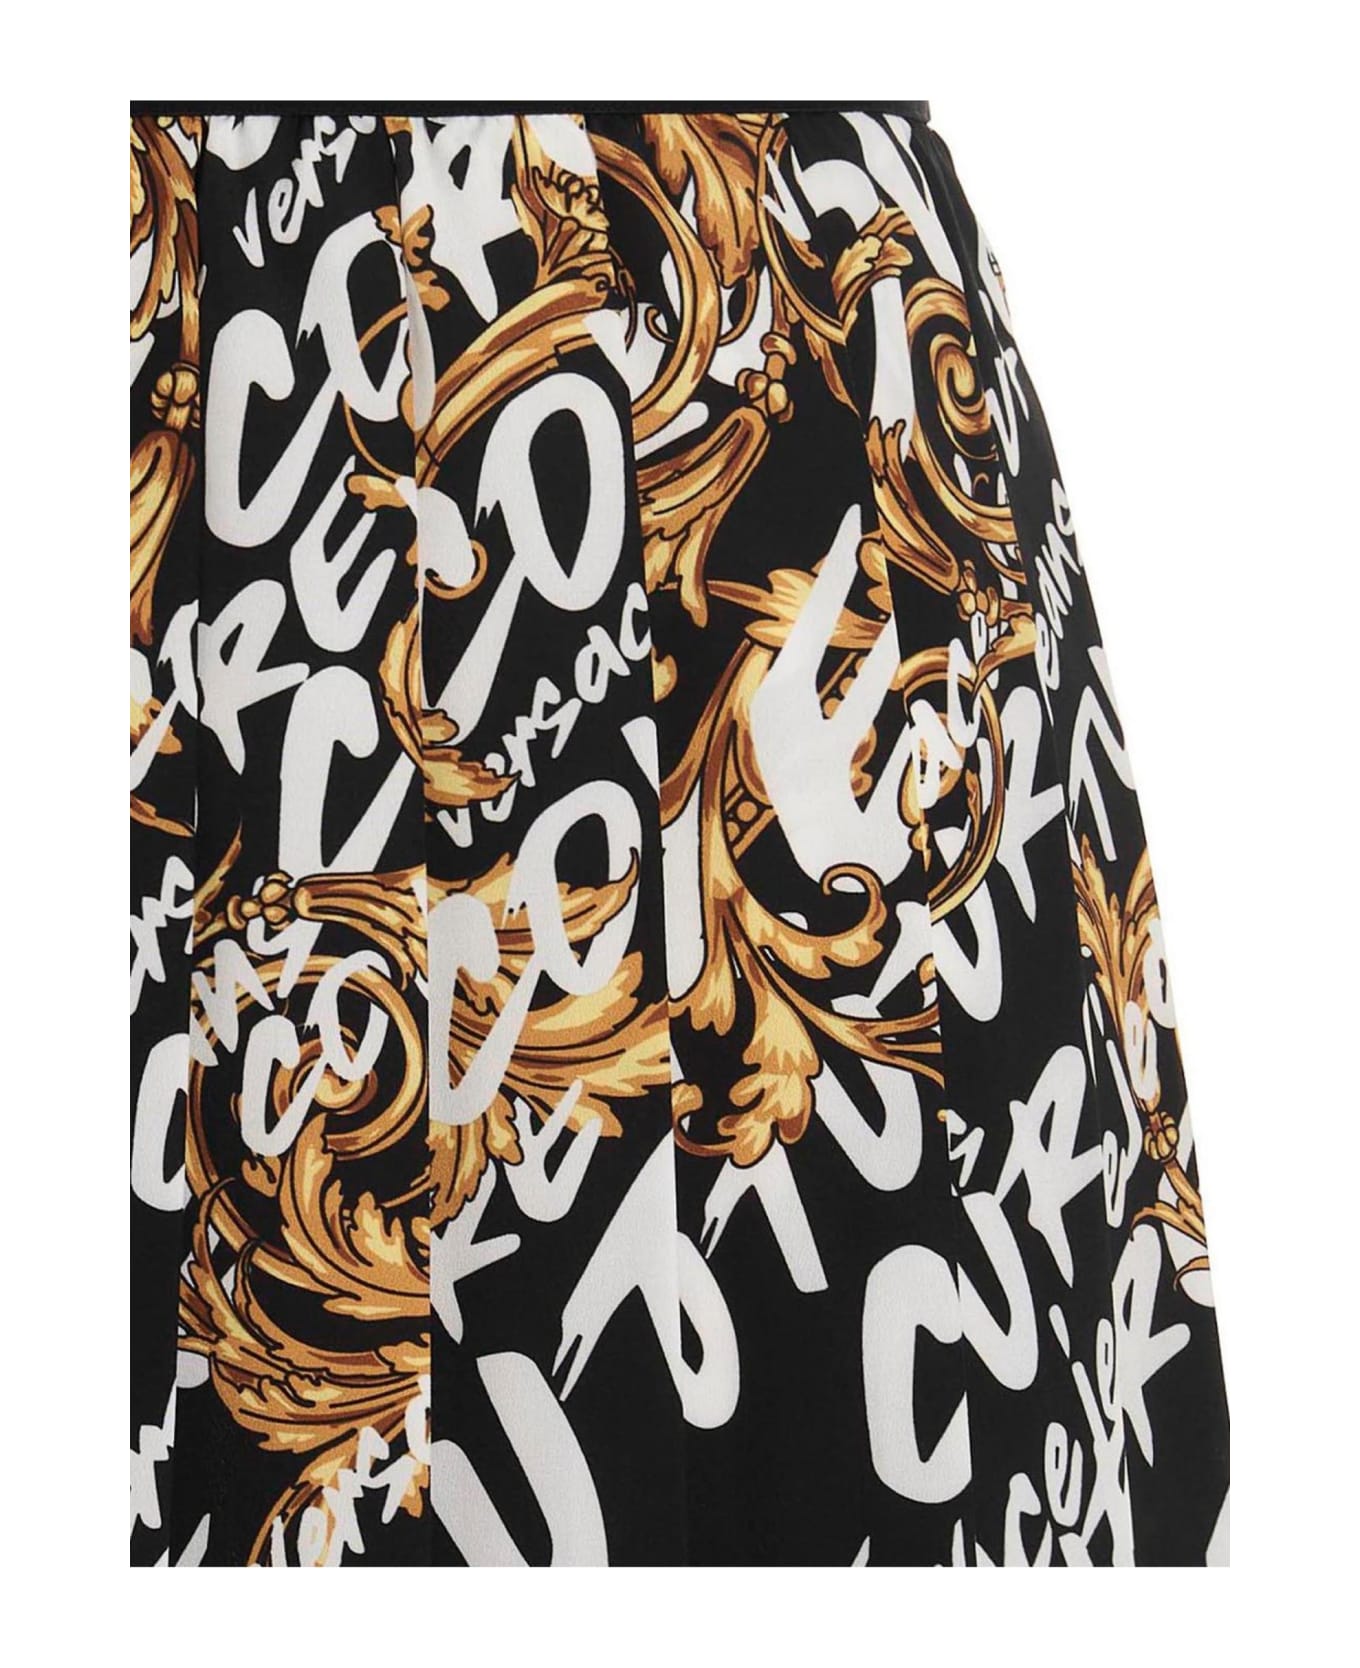 Versace Jeans Couture Skirts Black - Black